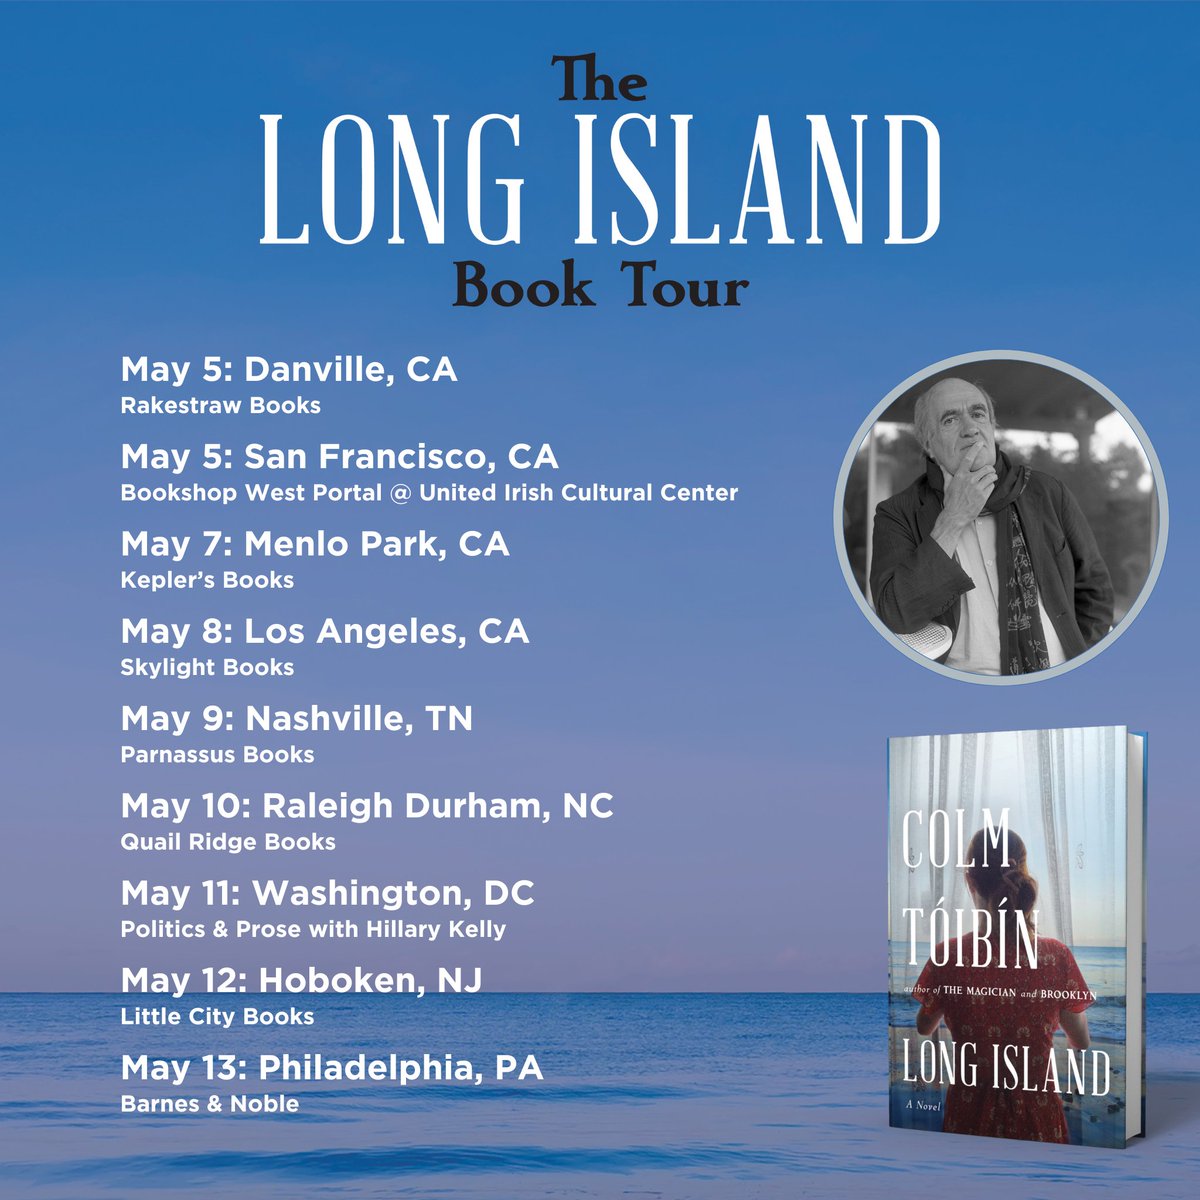 Colm Tóibín is on the road with LONG ISLAND, the incredible sequel to New York Times bestseller BROOKLYN!